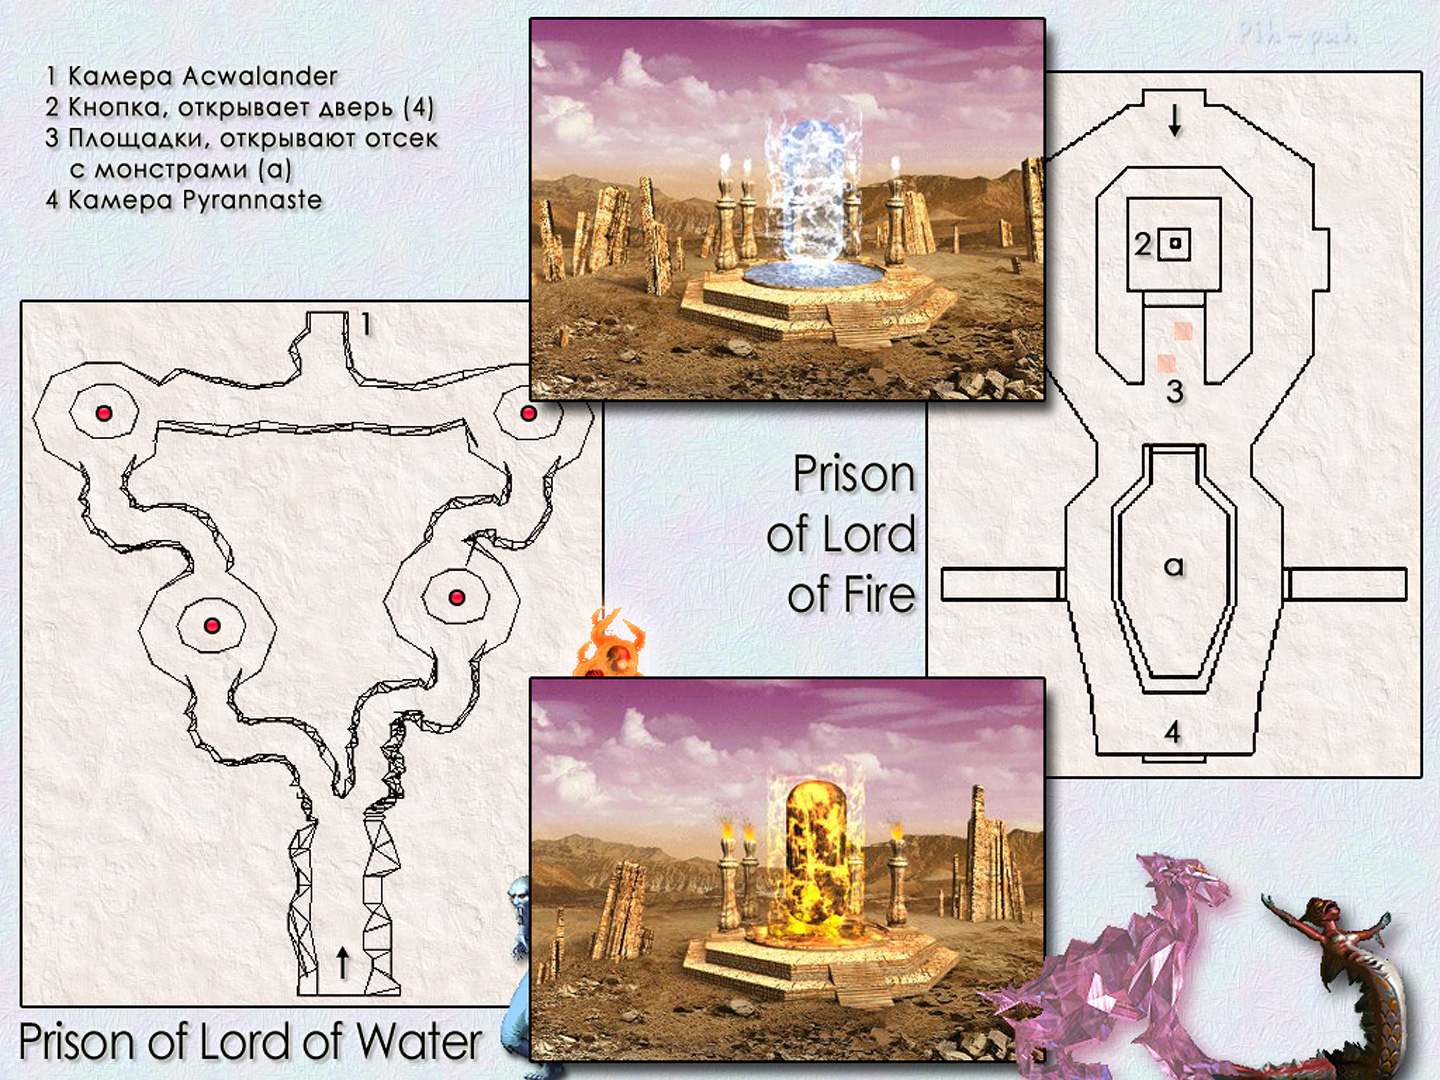 MIGHT AND MAGIC VIII. .  Prison of Lord of Fire  Prison of Lord of Water.